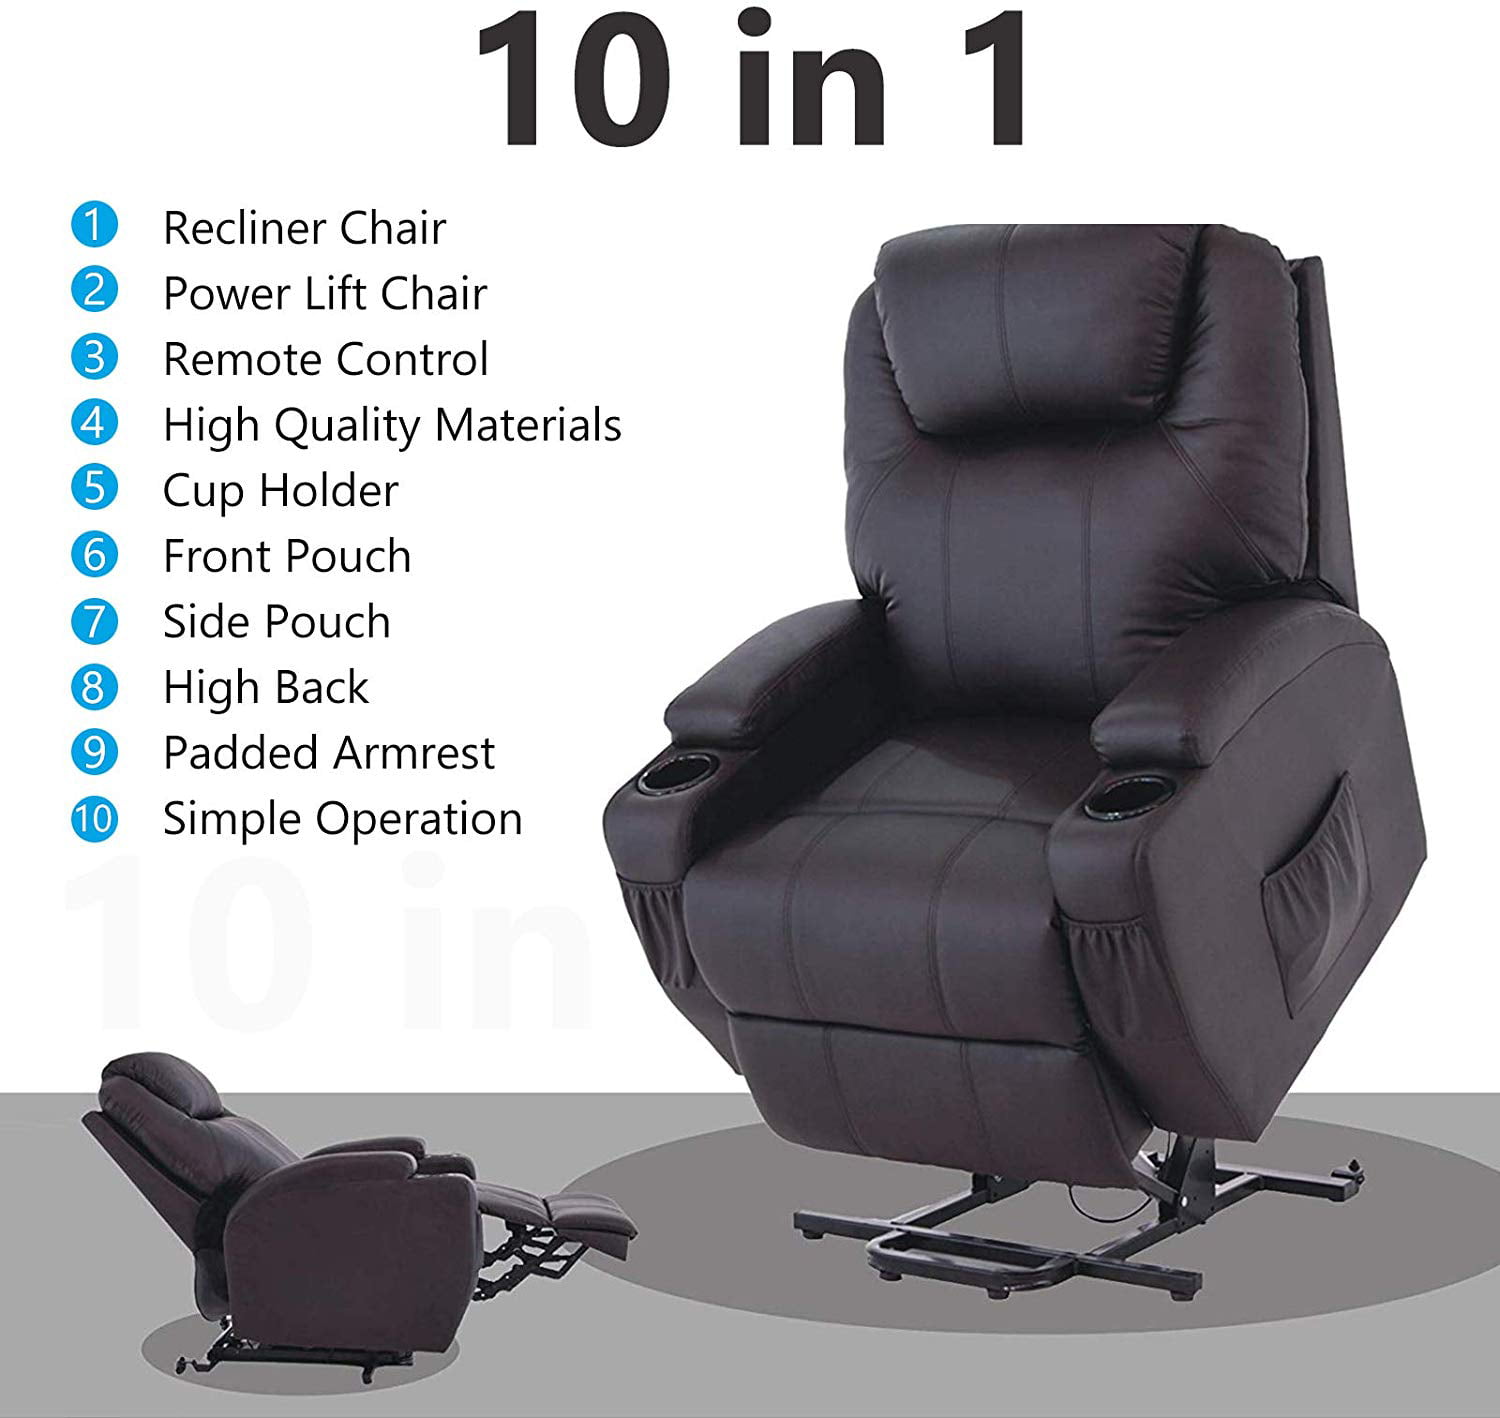 Mecor Lift Chairs For Elderly Power Lift Recliner Chair Bonded Leather Electric Lifting Chair With Remote Control Cup Holders Reinforced Heavy Duty Reclining Mechanism For Living Room Brown Walmart Com Walmart Com